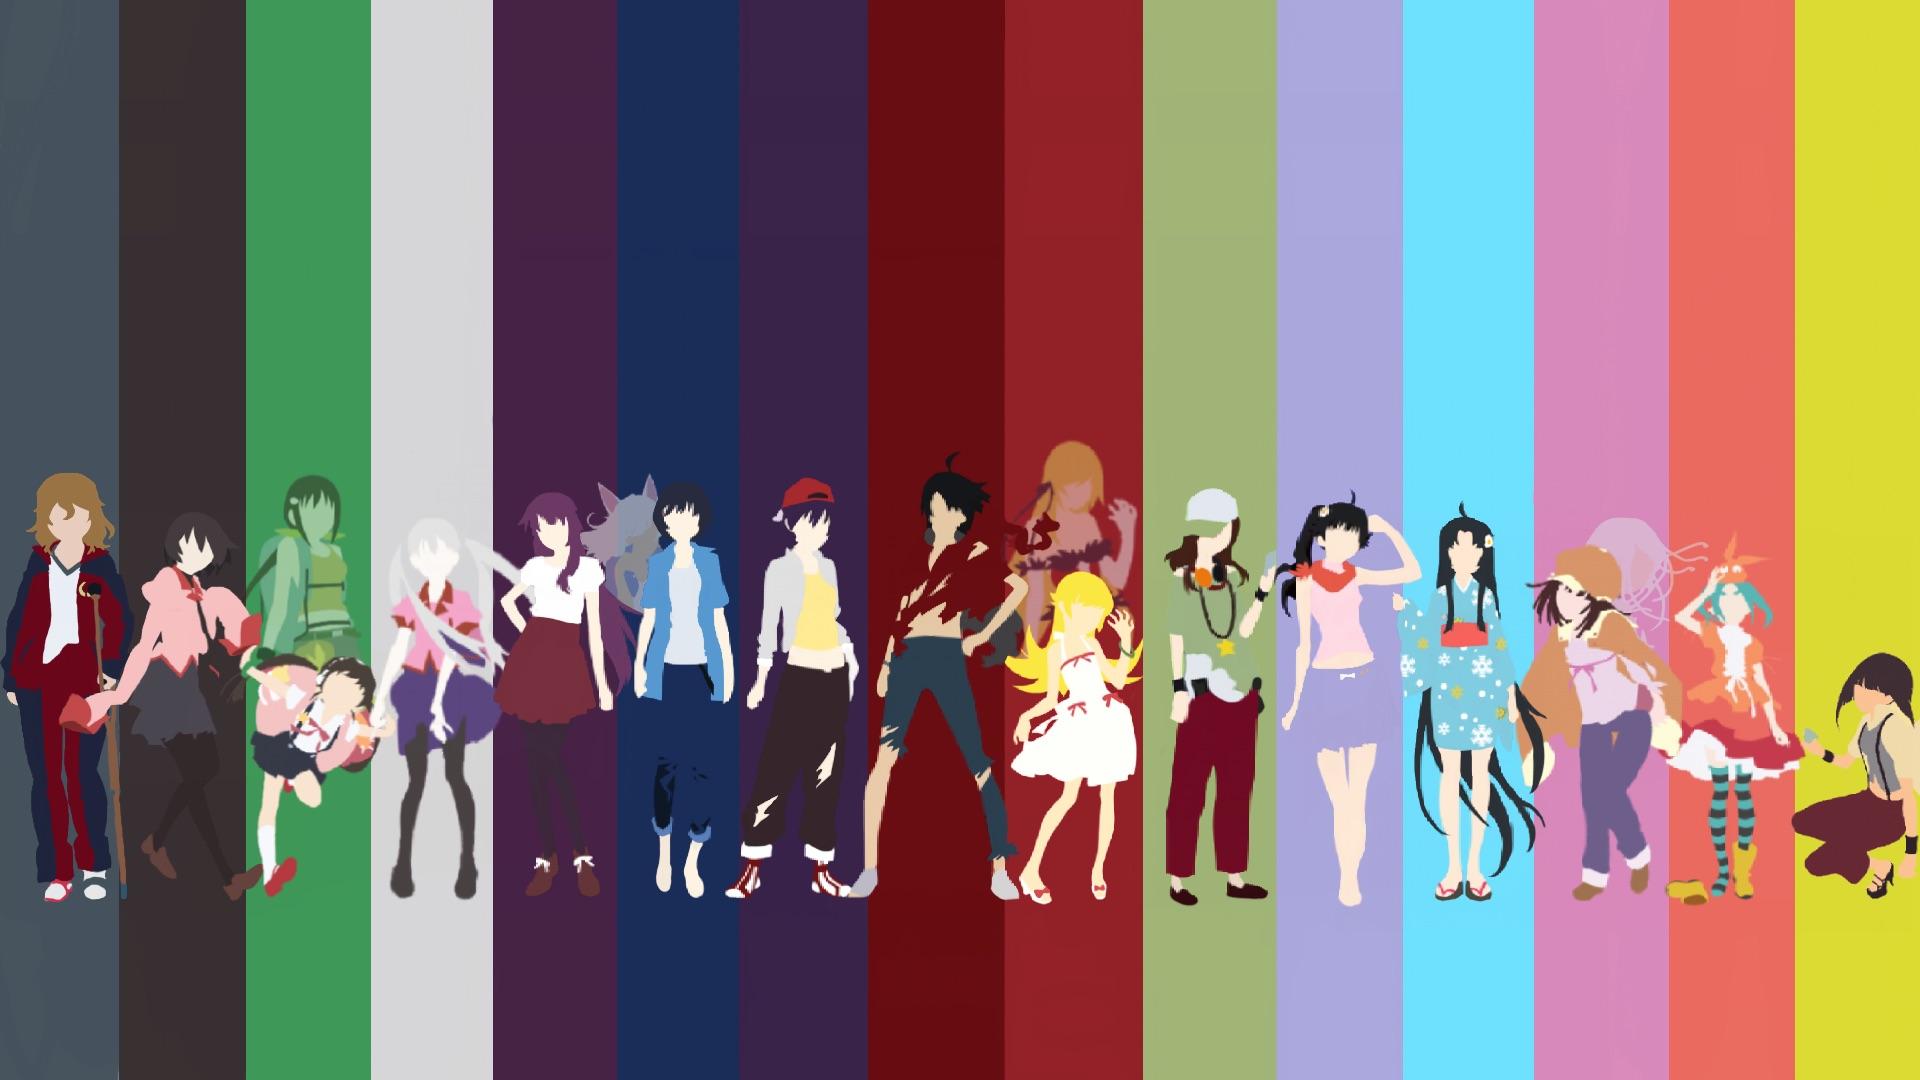 A wallpaper I edited to fit all Monogatari anime female characters